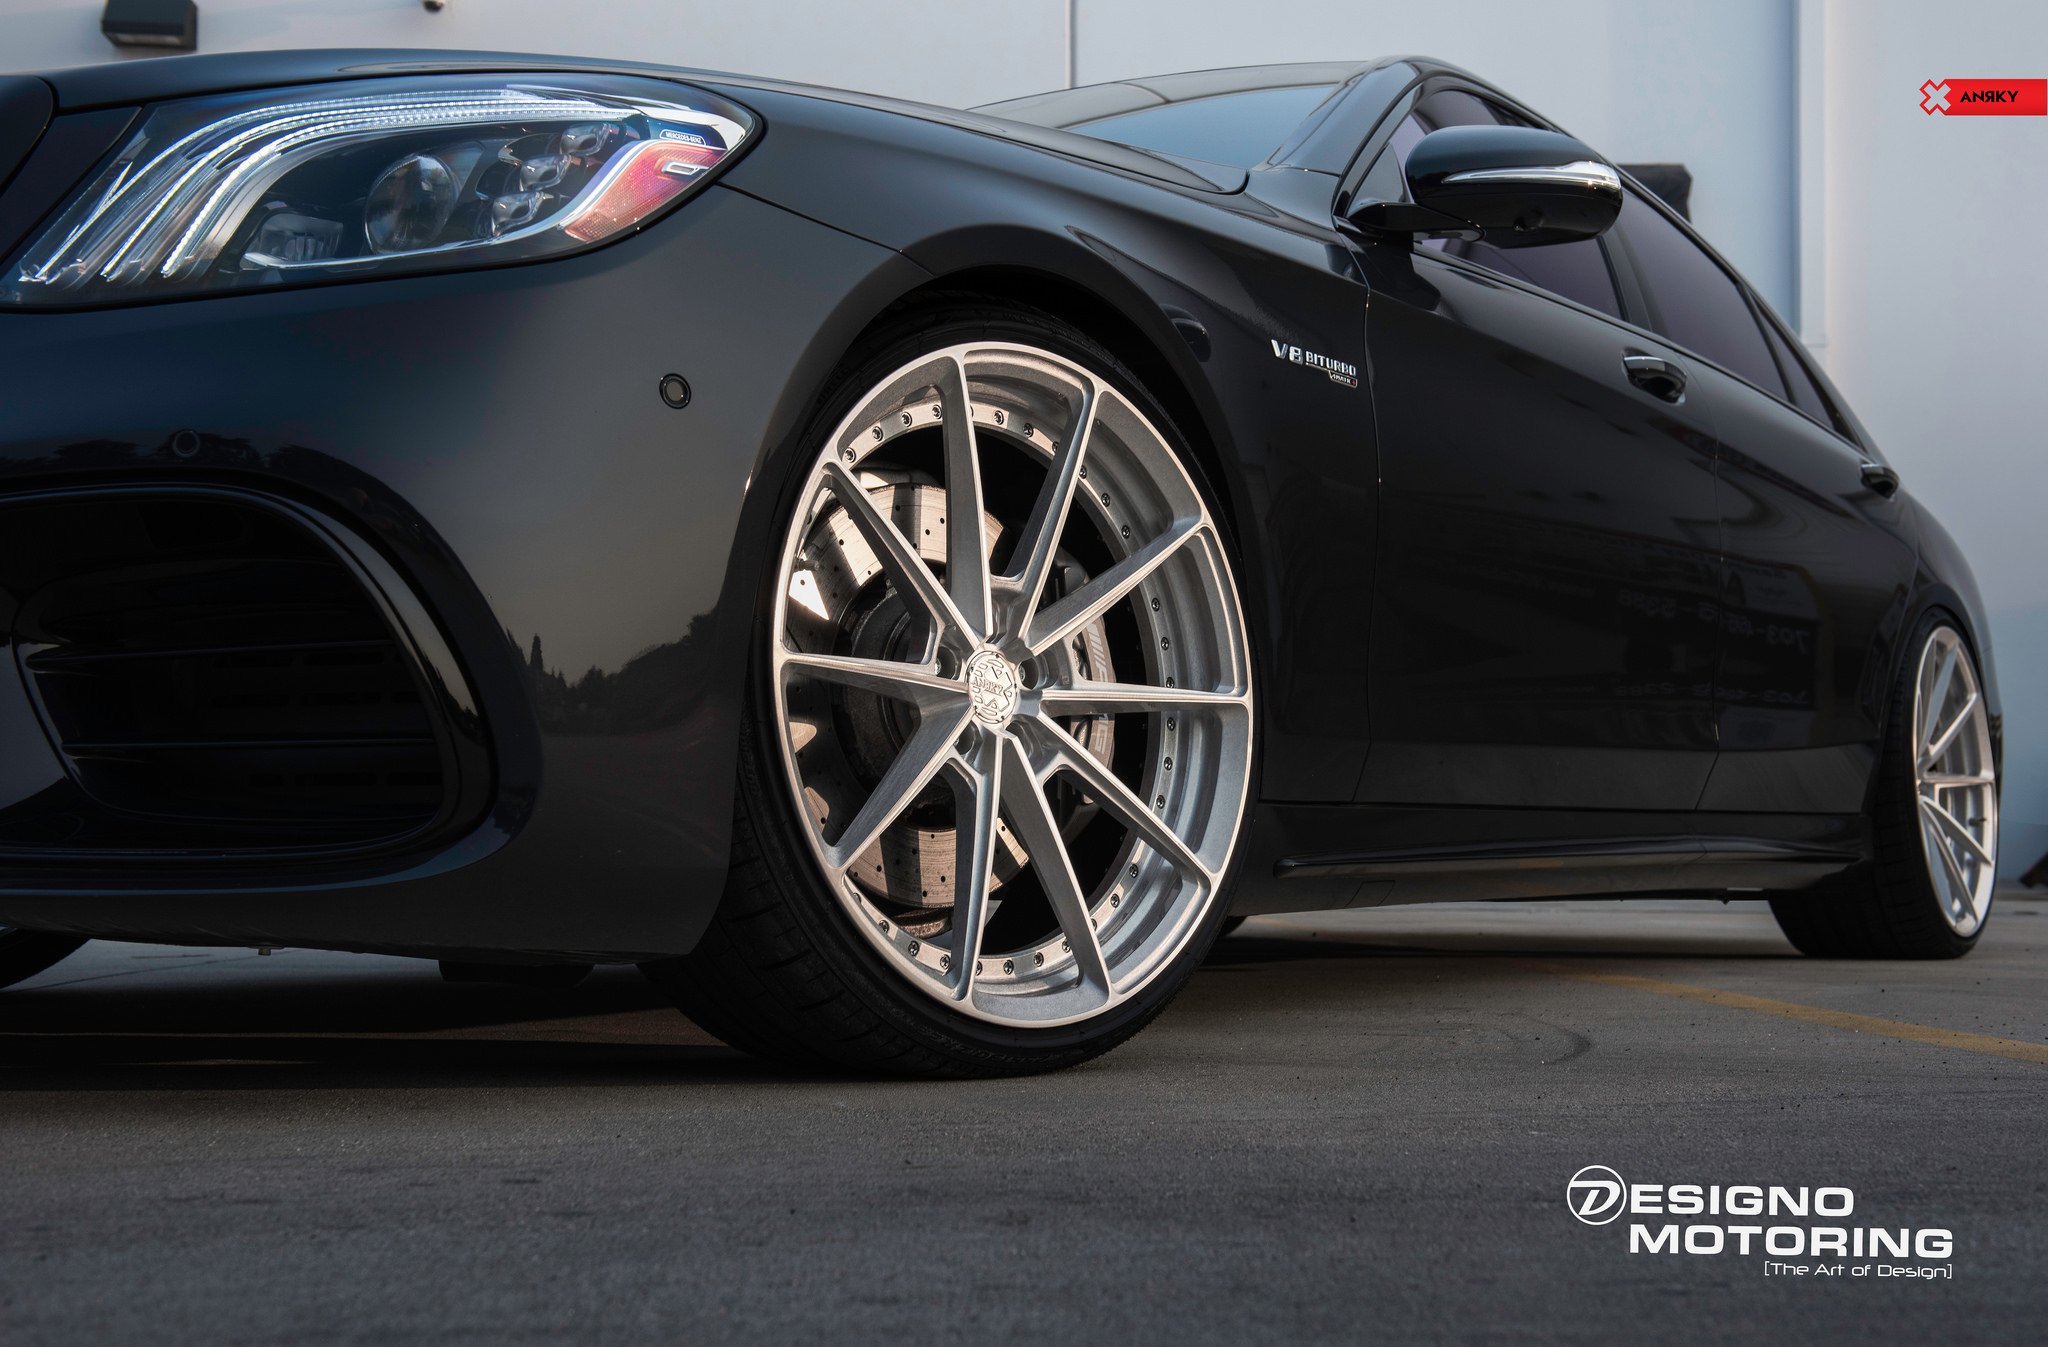 Gunmetal Anrky Wheels on Black Mercedes S Class - Photo by Anrky Wheels